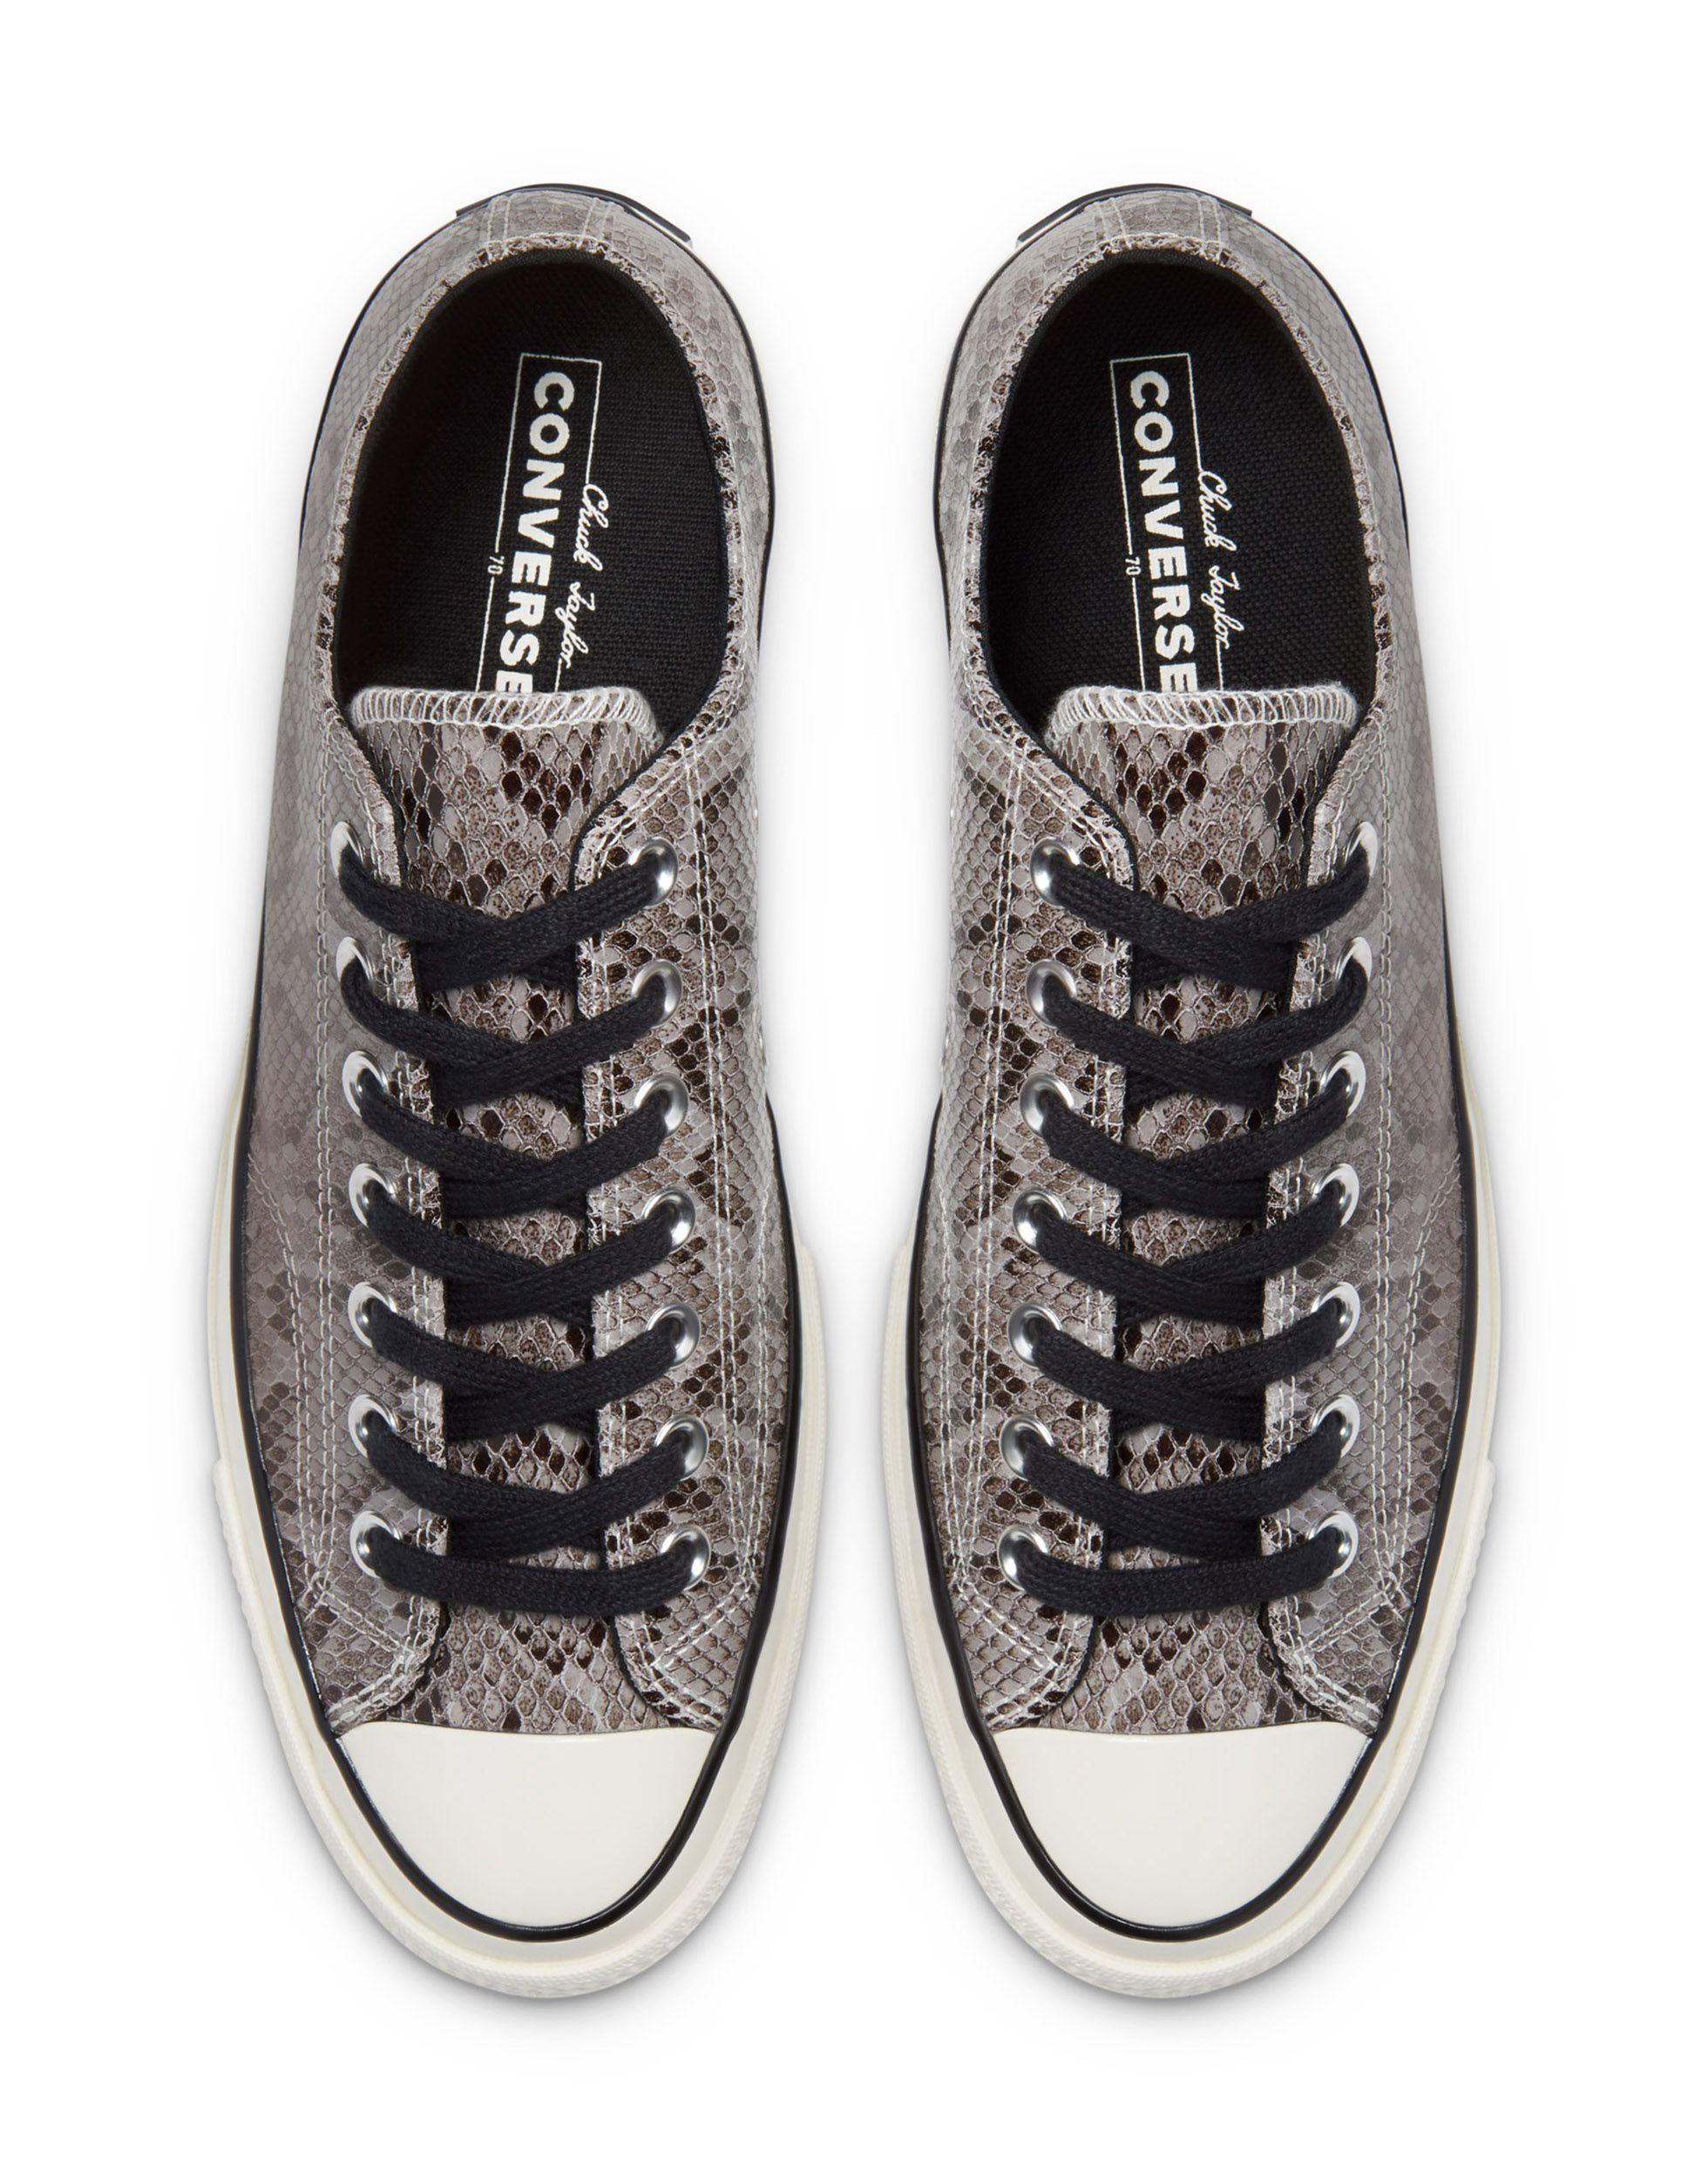 Converse Chuck 70 Low Archive Reptile Snake Print Leather Sneakers in Gray  | Lyst